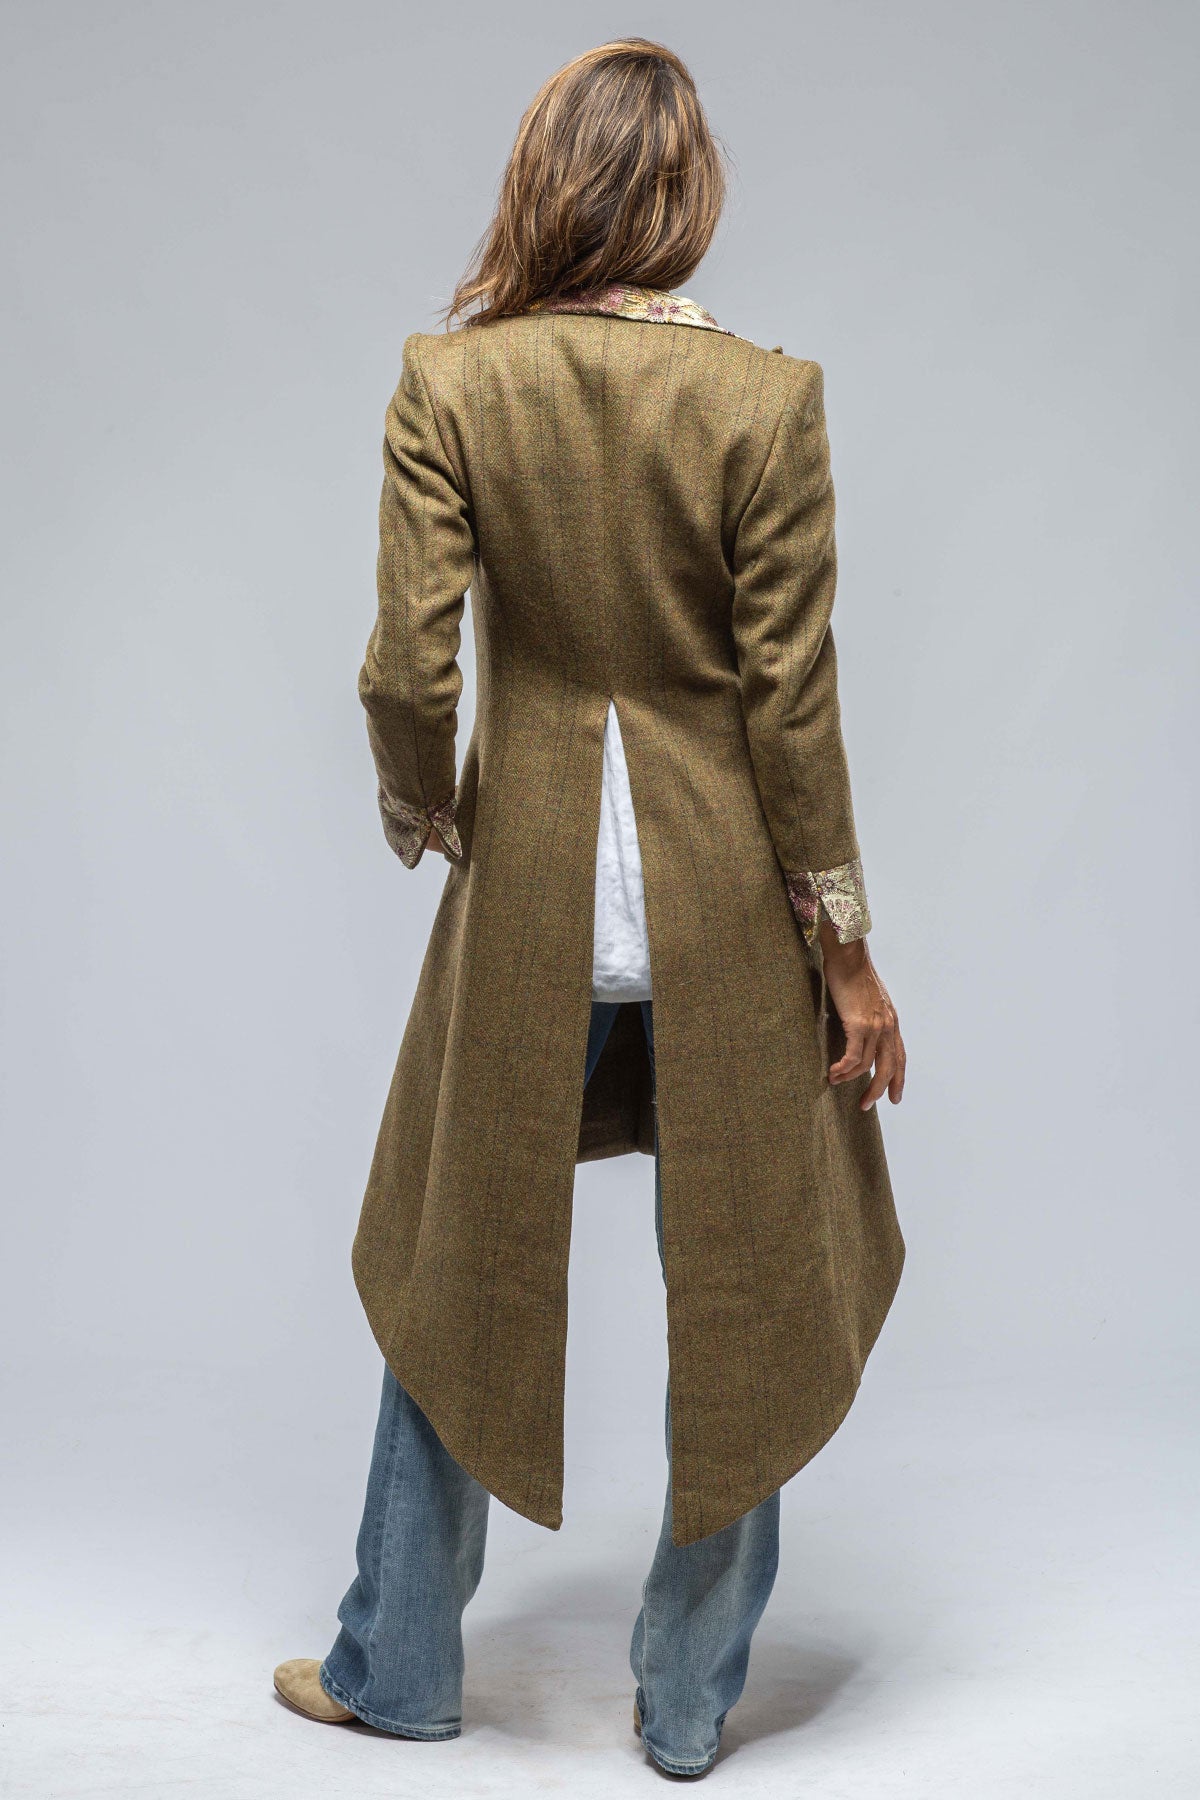 Evora Tweed Coat W/ Embroidery | Ladies - Tailored - Jackets | T.ba